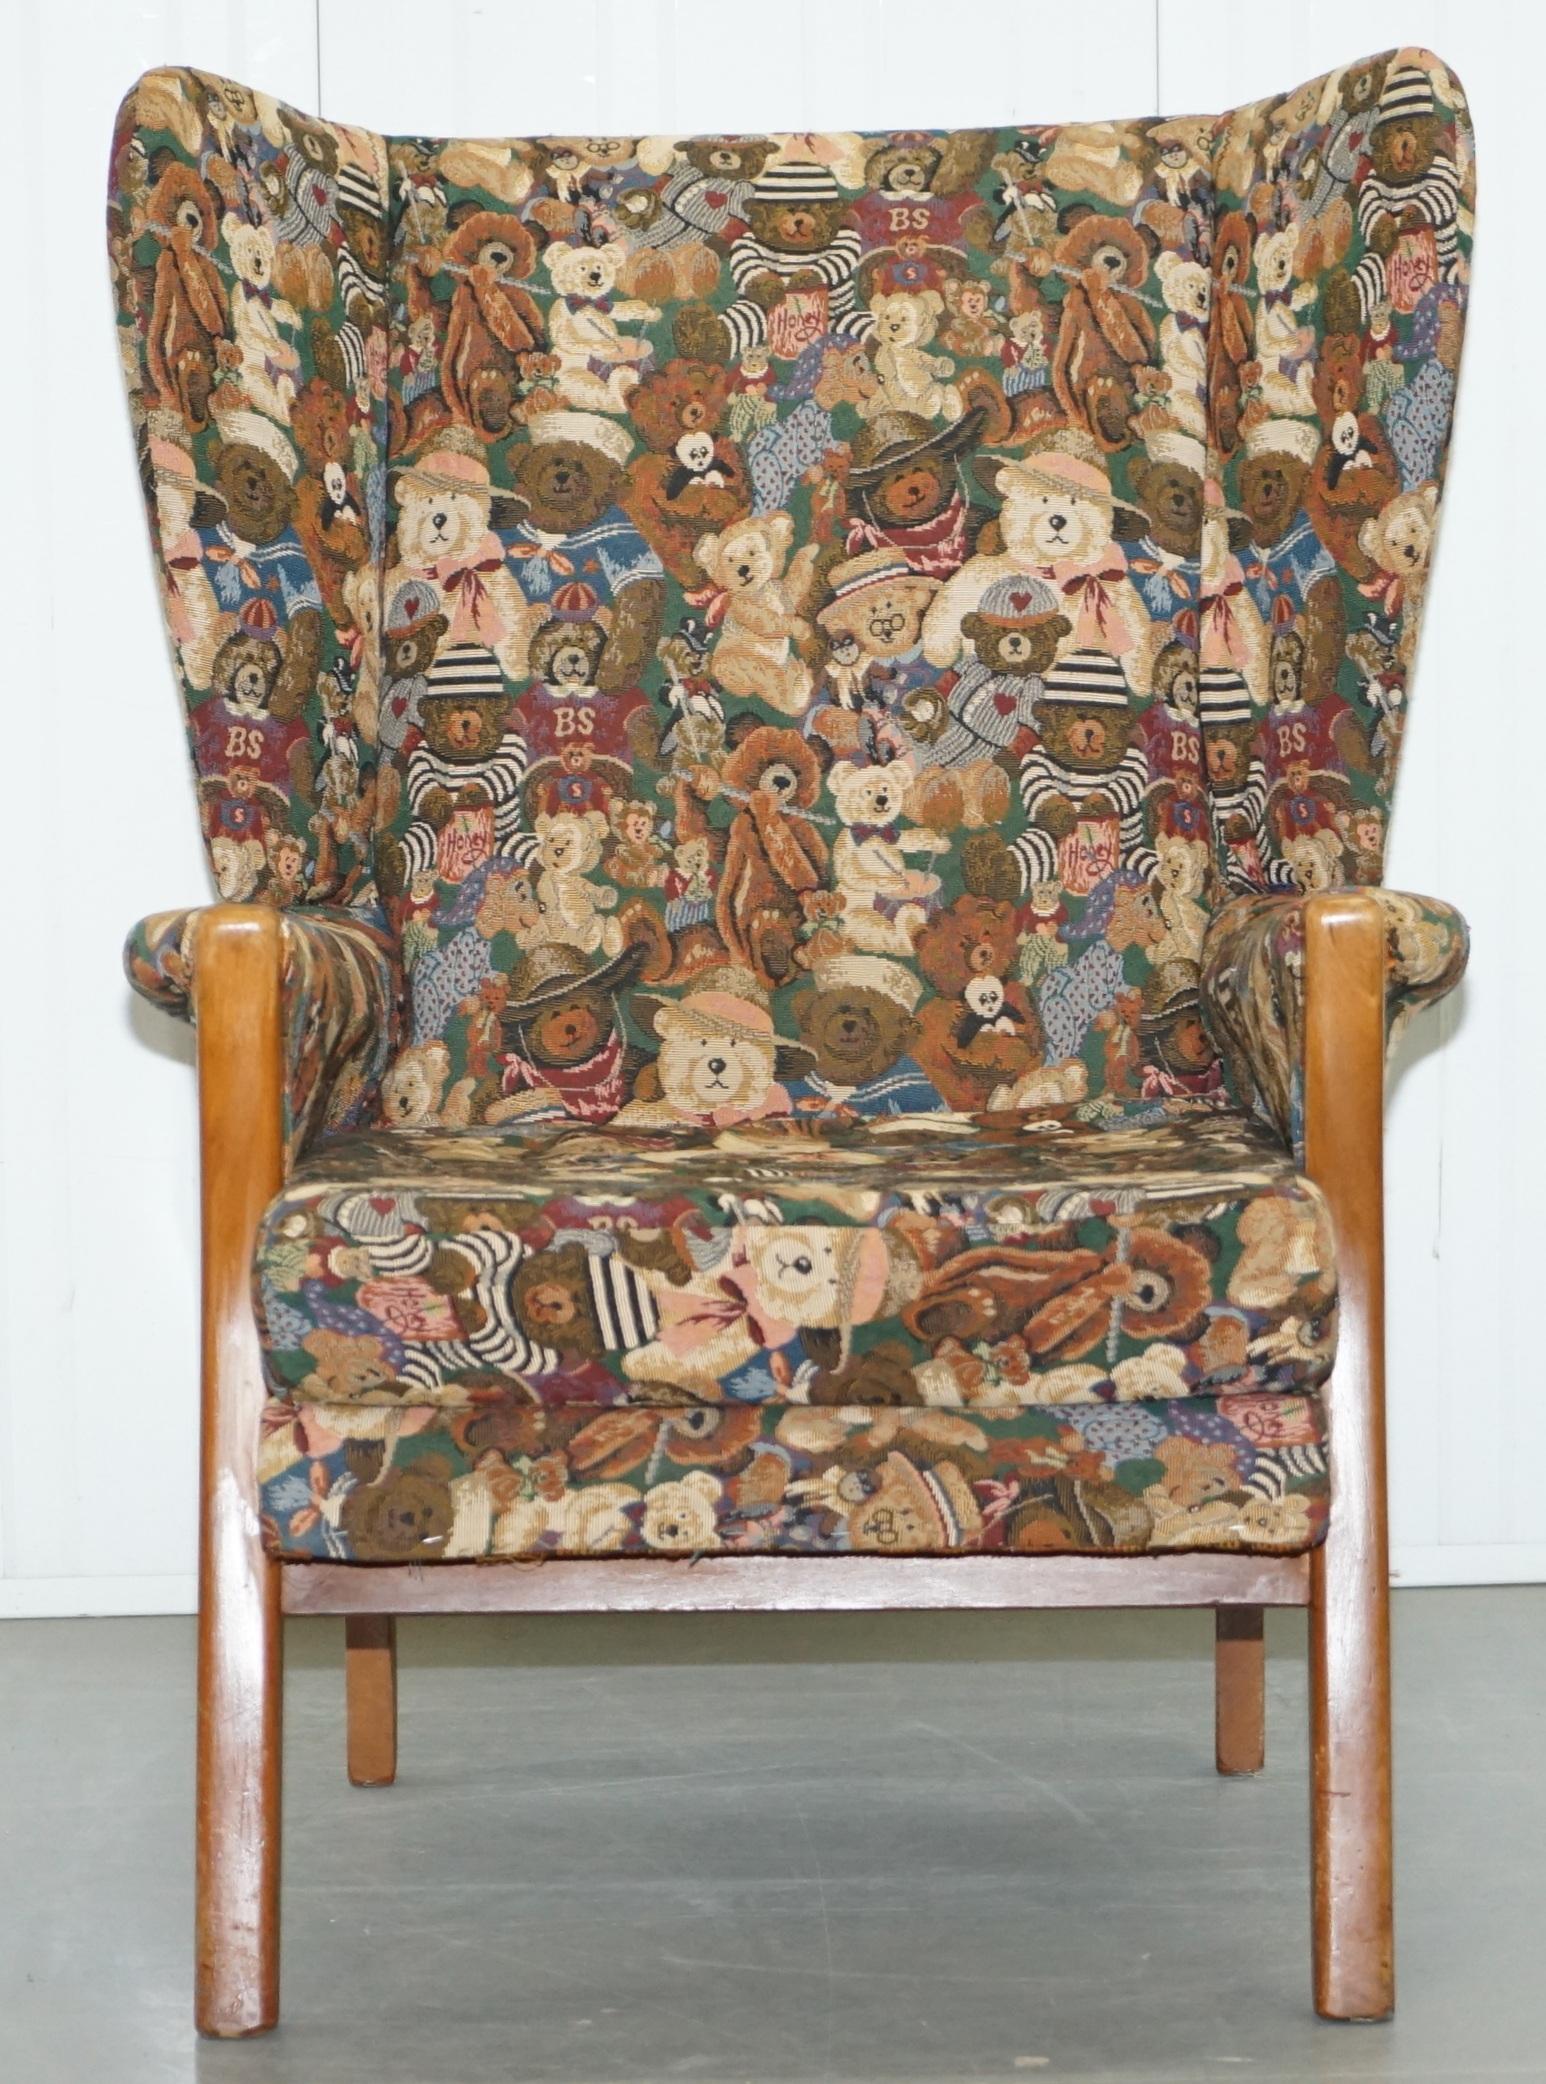 Wimbledon-Furniture is delighted to offer for sale this very nice vintage Parker Knoll wingback armchair with blond wood frame and Teddy bear patterned upholstery

Please note the delivery fee listed is just a guide, it covers within the M25 only,